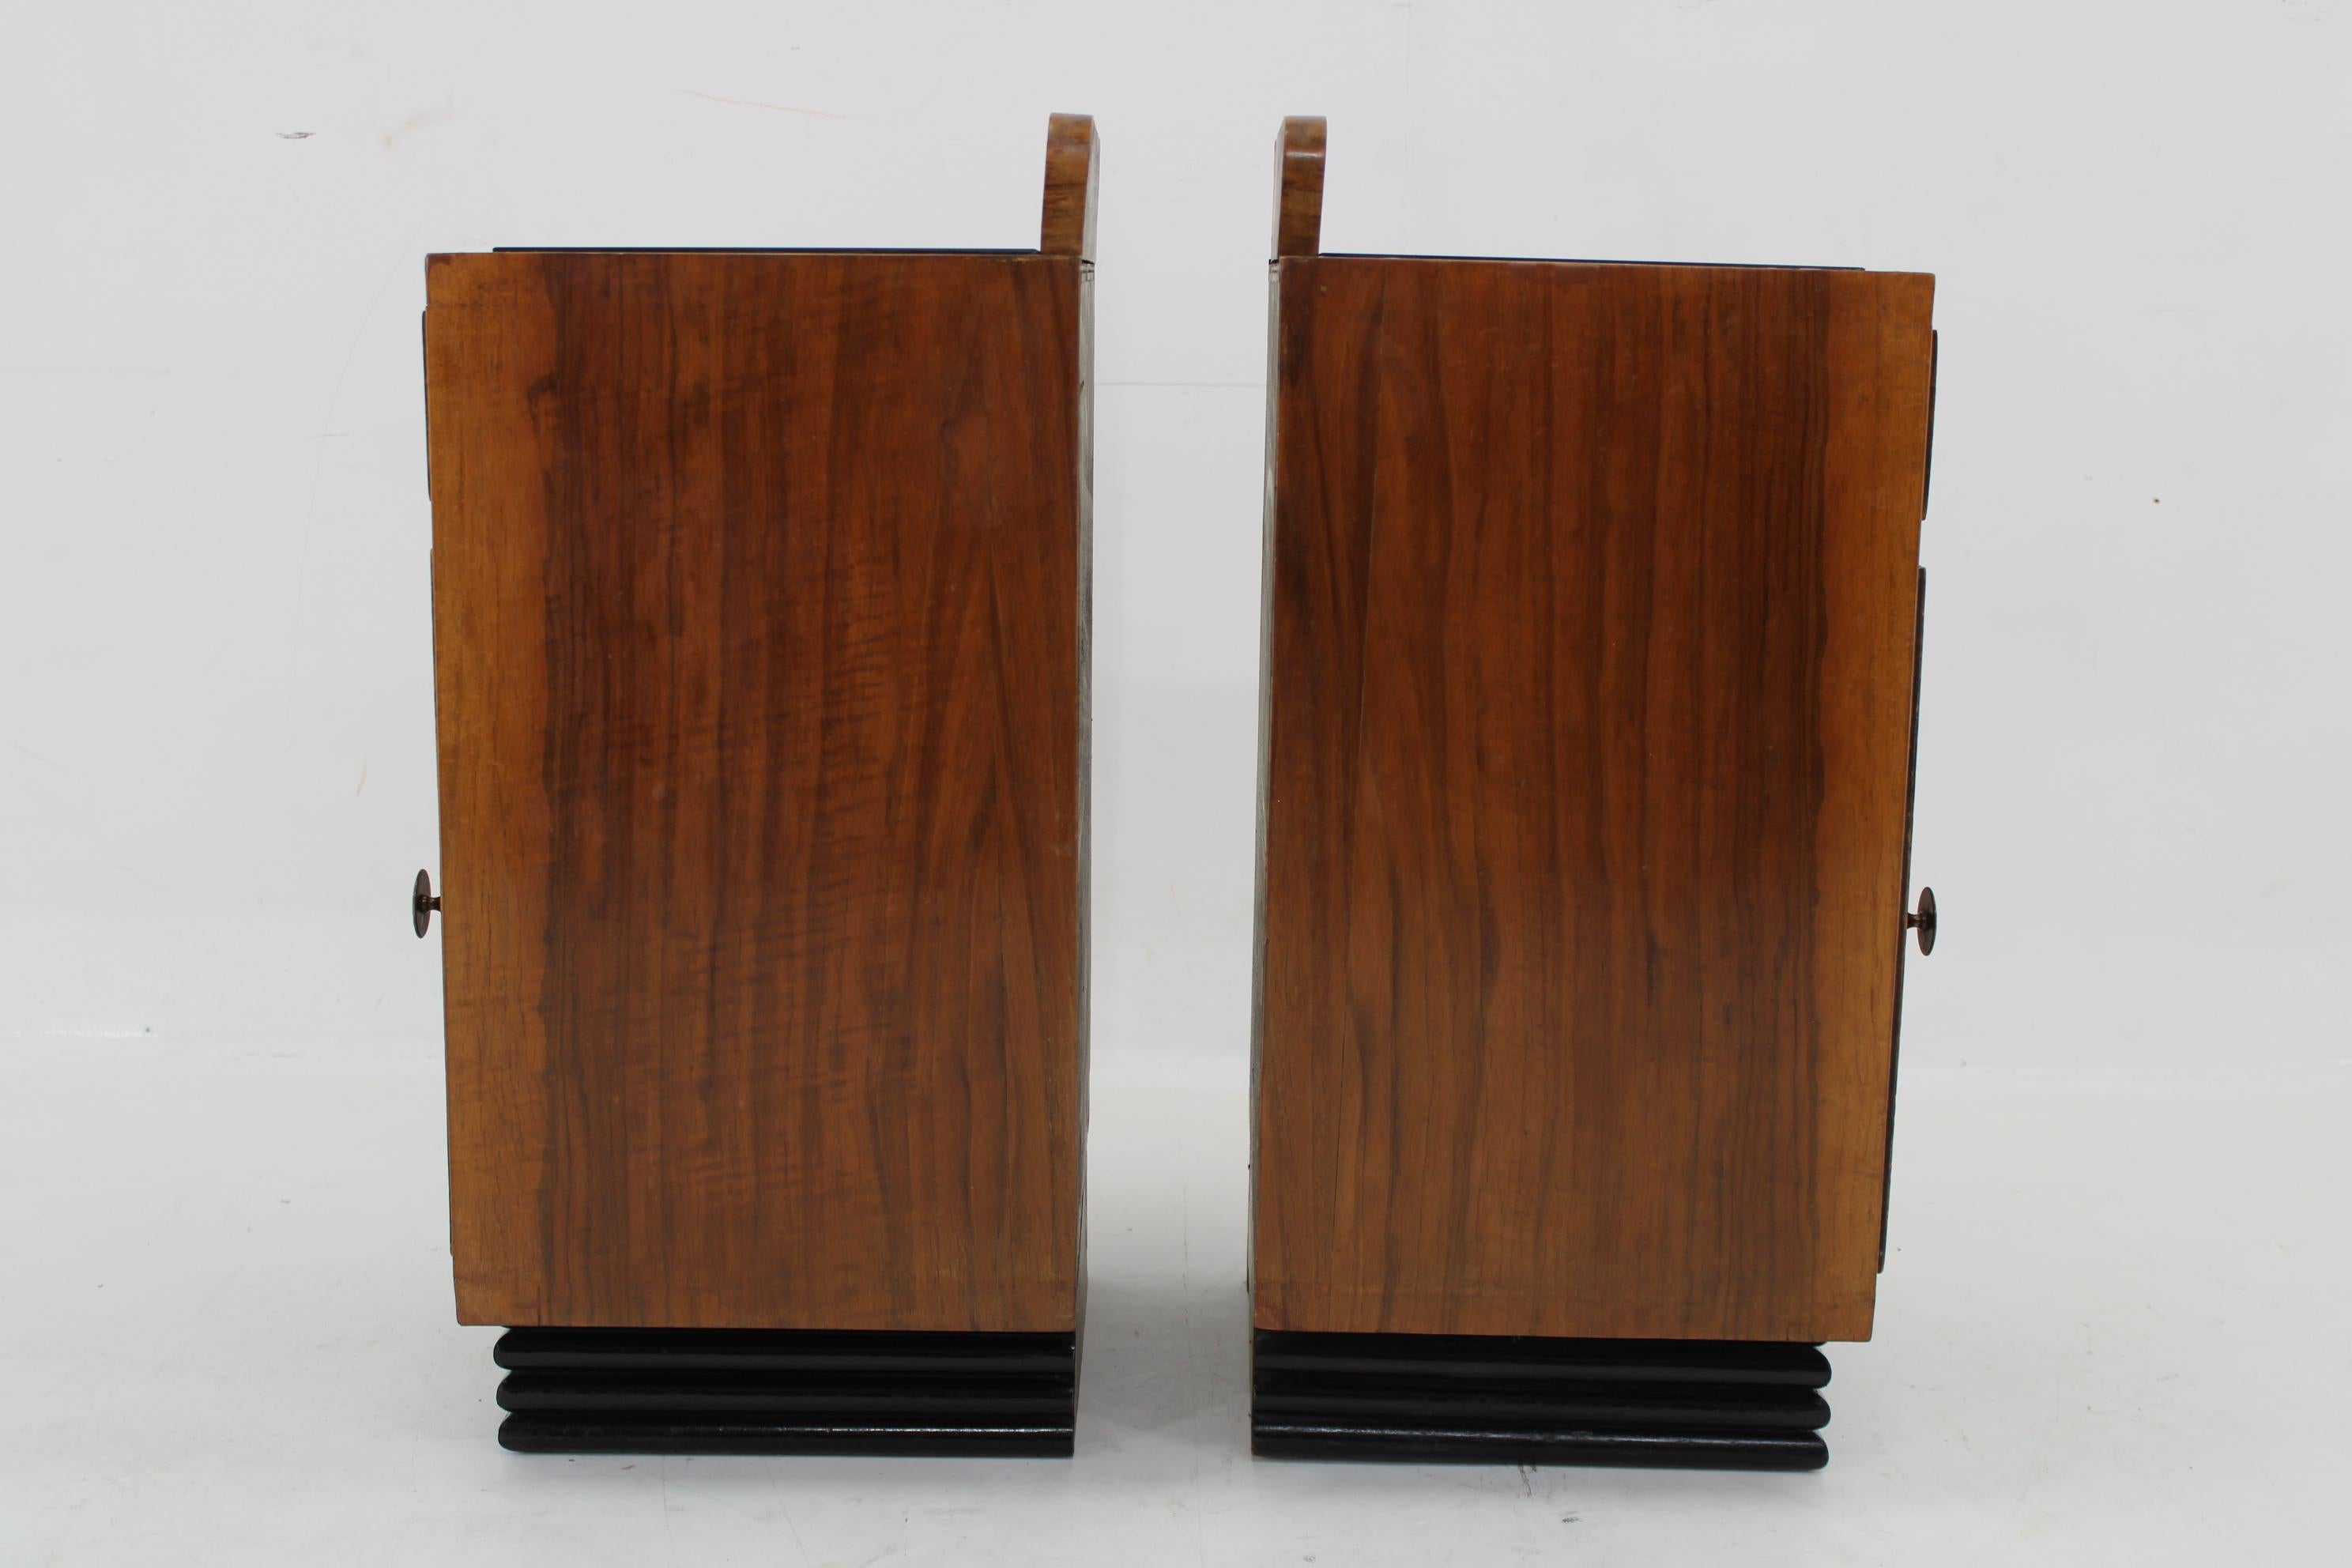 1940s Pair of Art Deco Nightstands in Walnut Finish, Italy For Sale 2